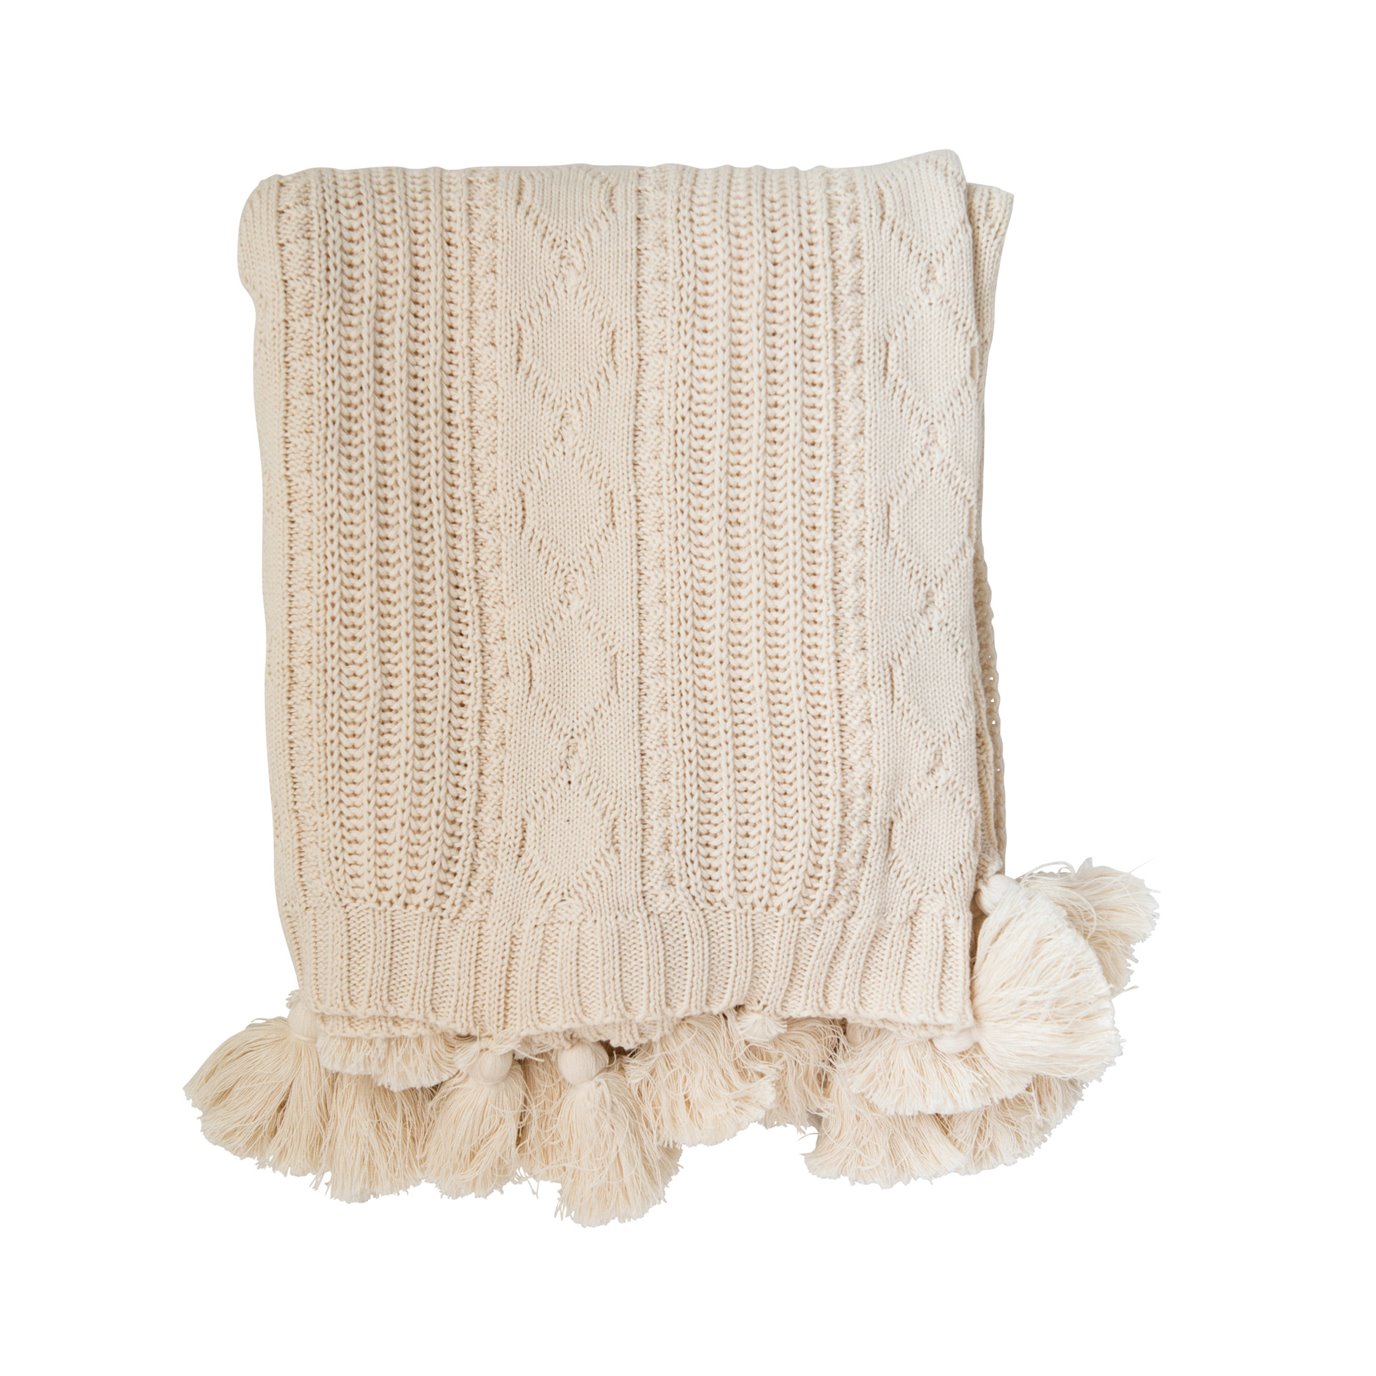 Chunky Cable Knit Cream Cotton Throw with Tassels